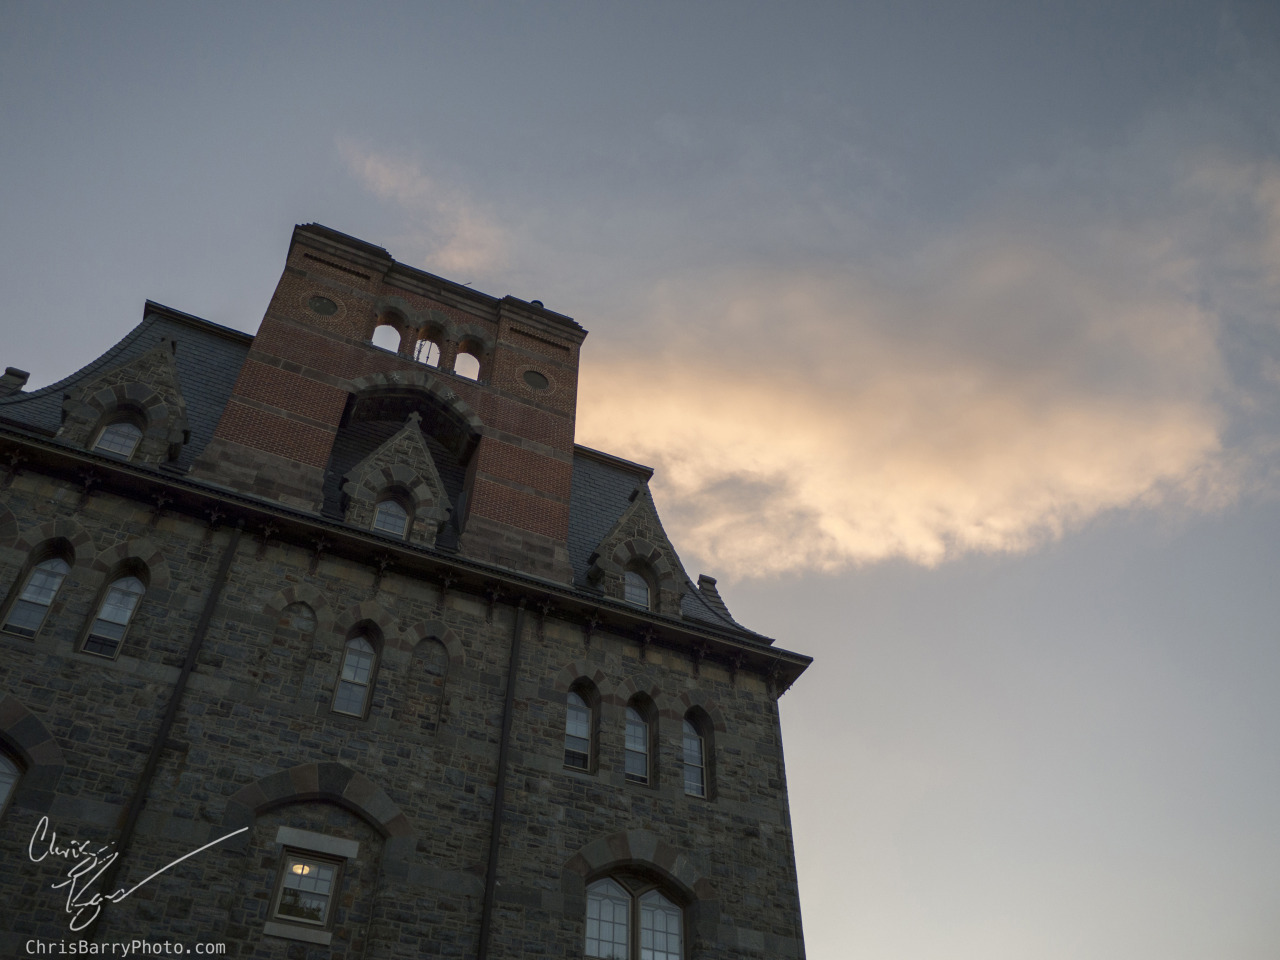 Packer Hall/UC sunset clouds